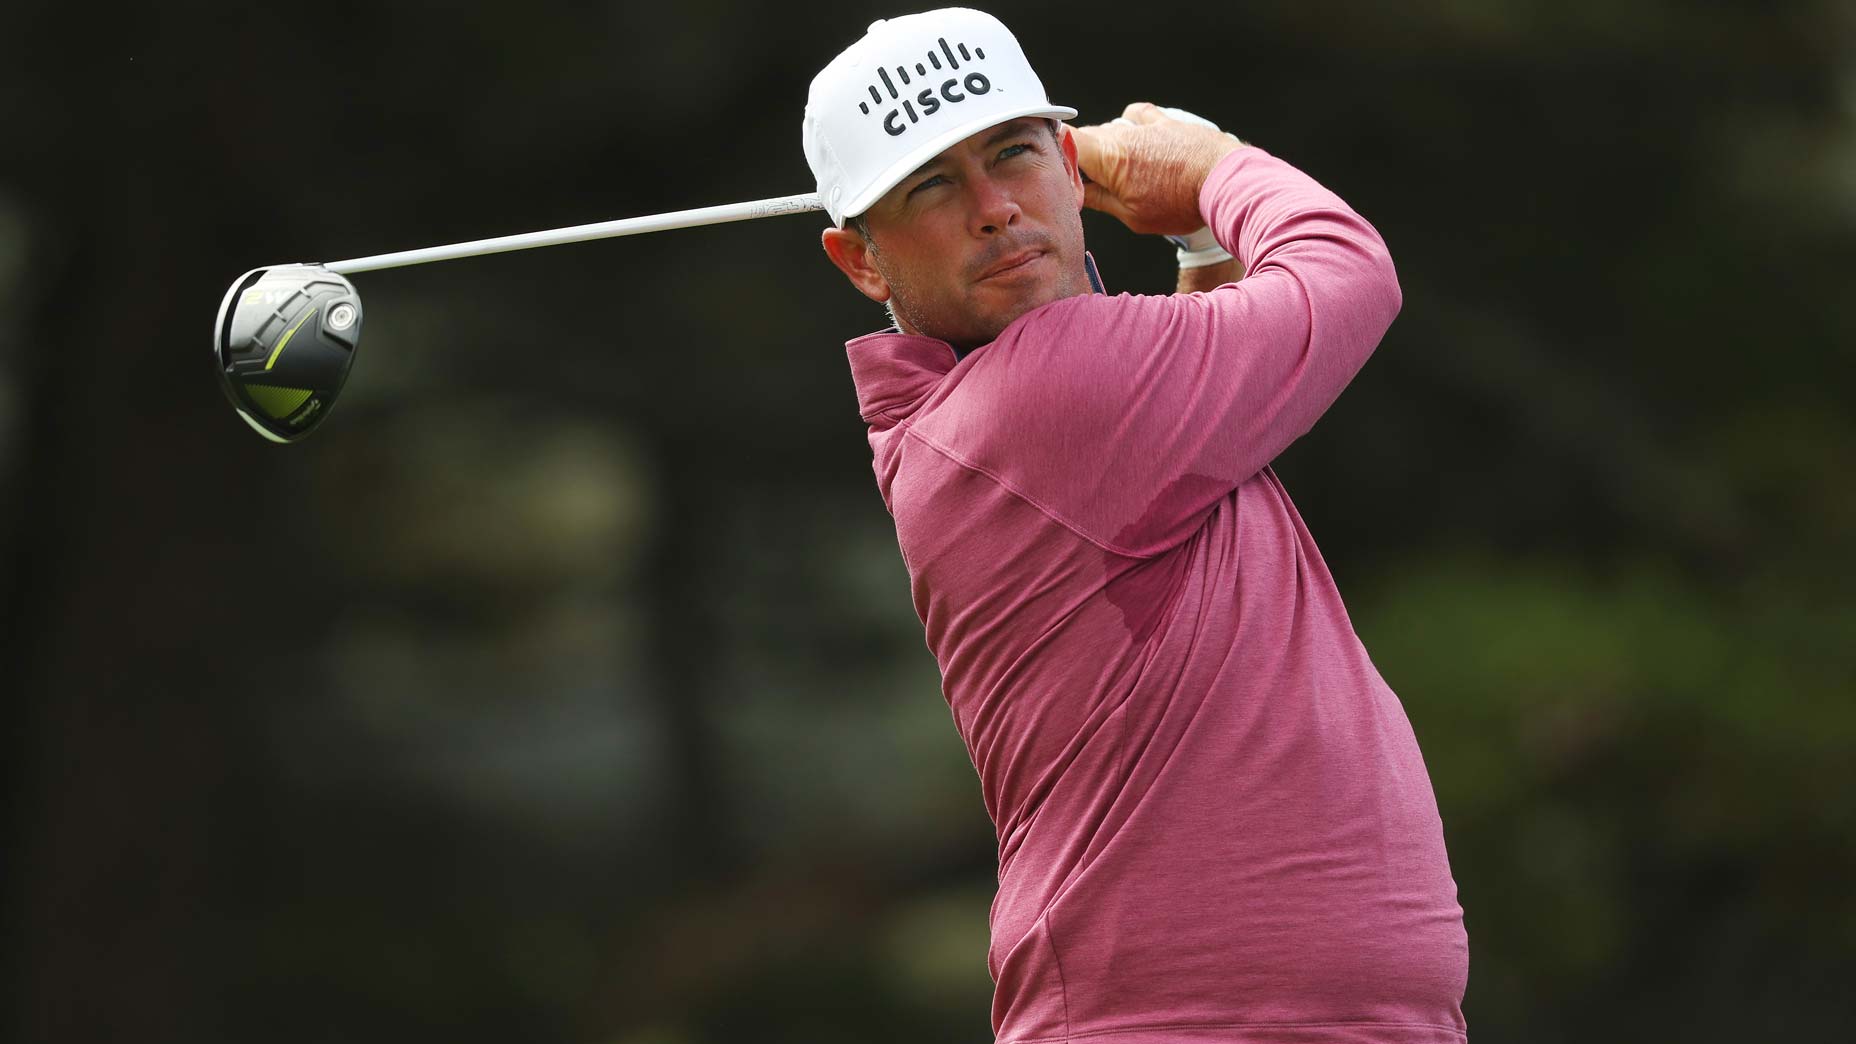 U.S. Open darkhorse pick? Why Chez Reavie might be your guy